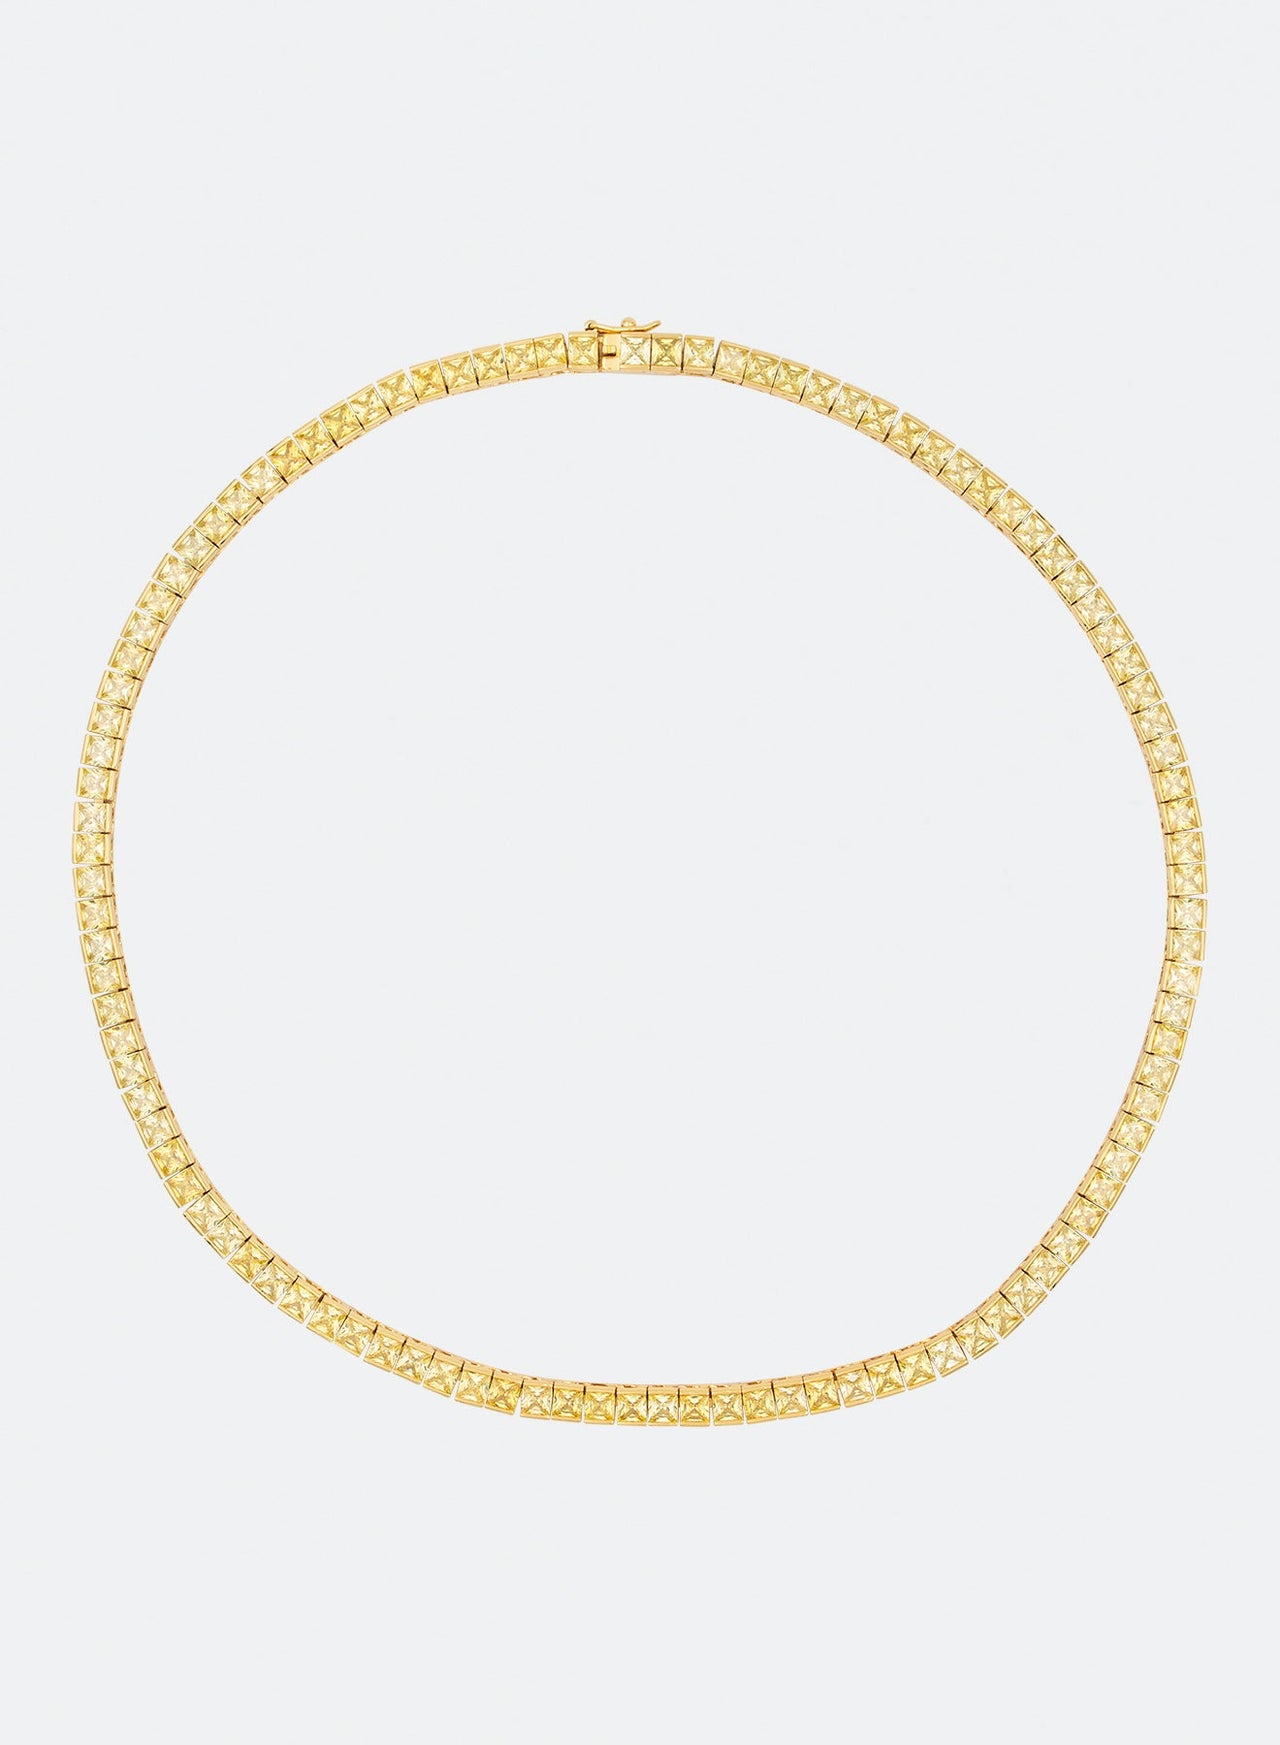 18k gold coated tennis chain necklace with hand-set princess-cut stones in yellow